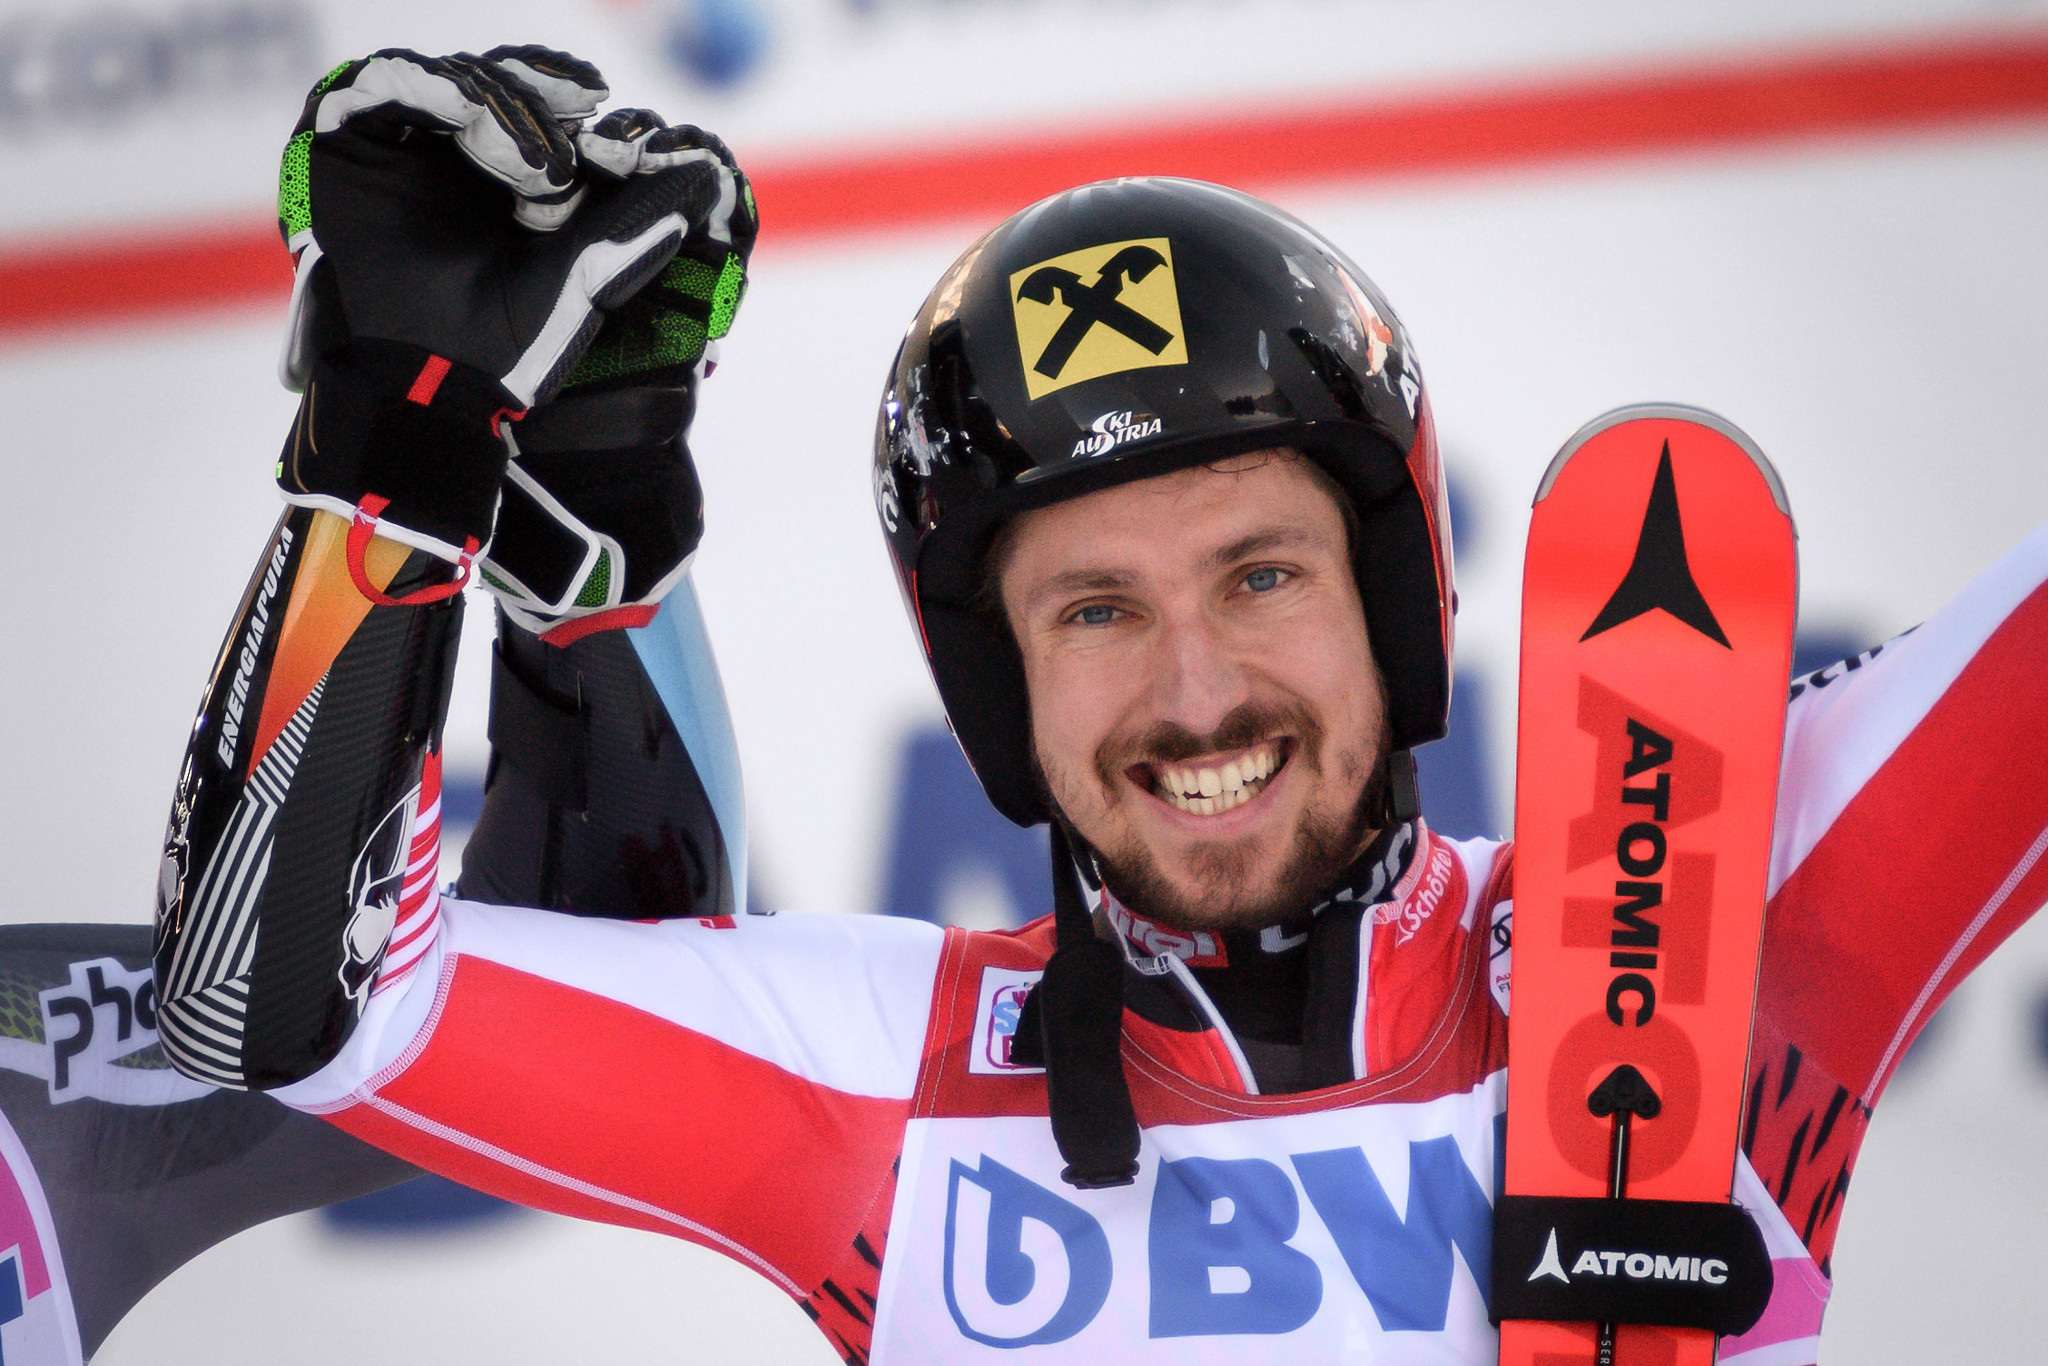 Second run surge gives Hirscher victory at FIS Alpine Skiing World Cup in Adelboden